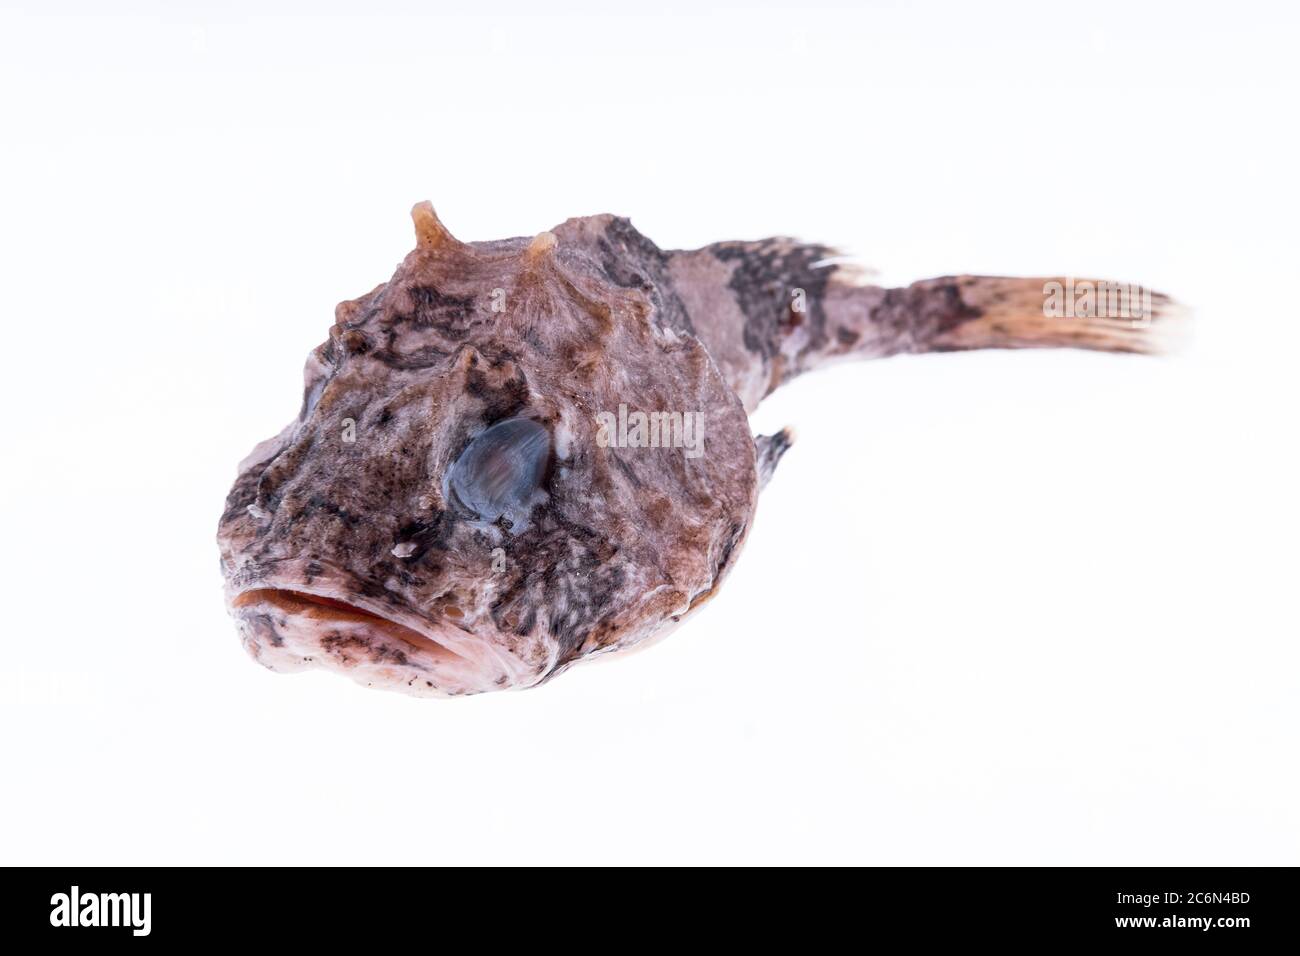 (don't have the corresponding cataloguation of this fish, will update) from the collection of the Spanish Institute of Oceanography of Malaga, Spain. Stock Photo